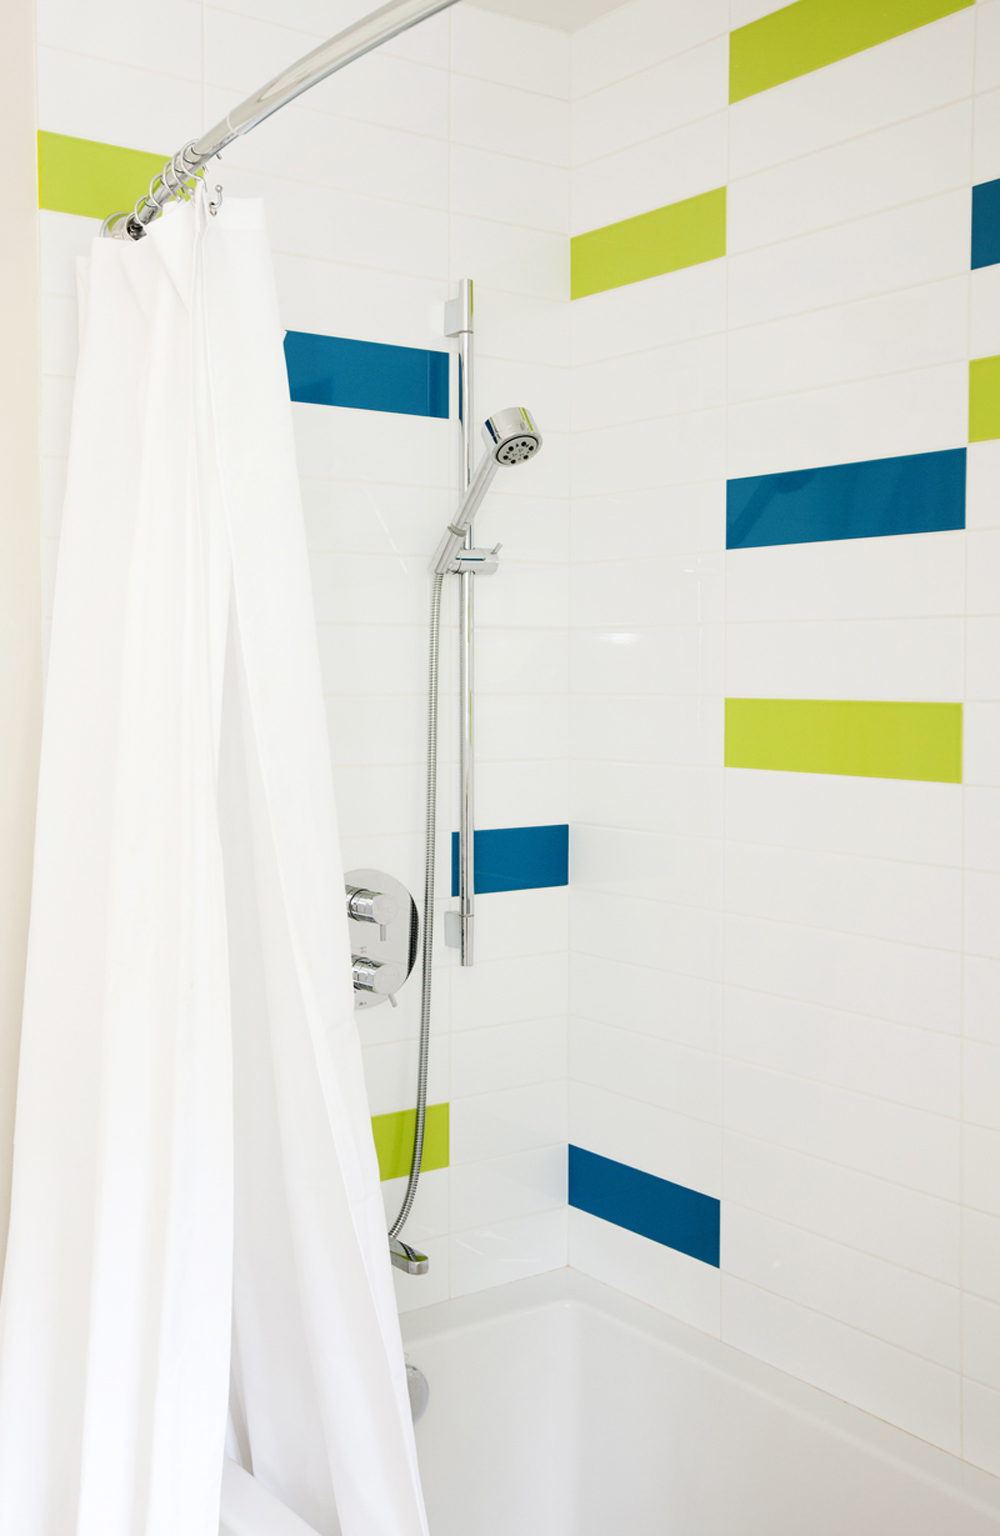 Vivid blocks of tiles in a renovated shower